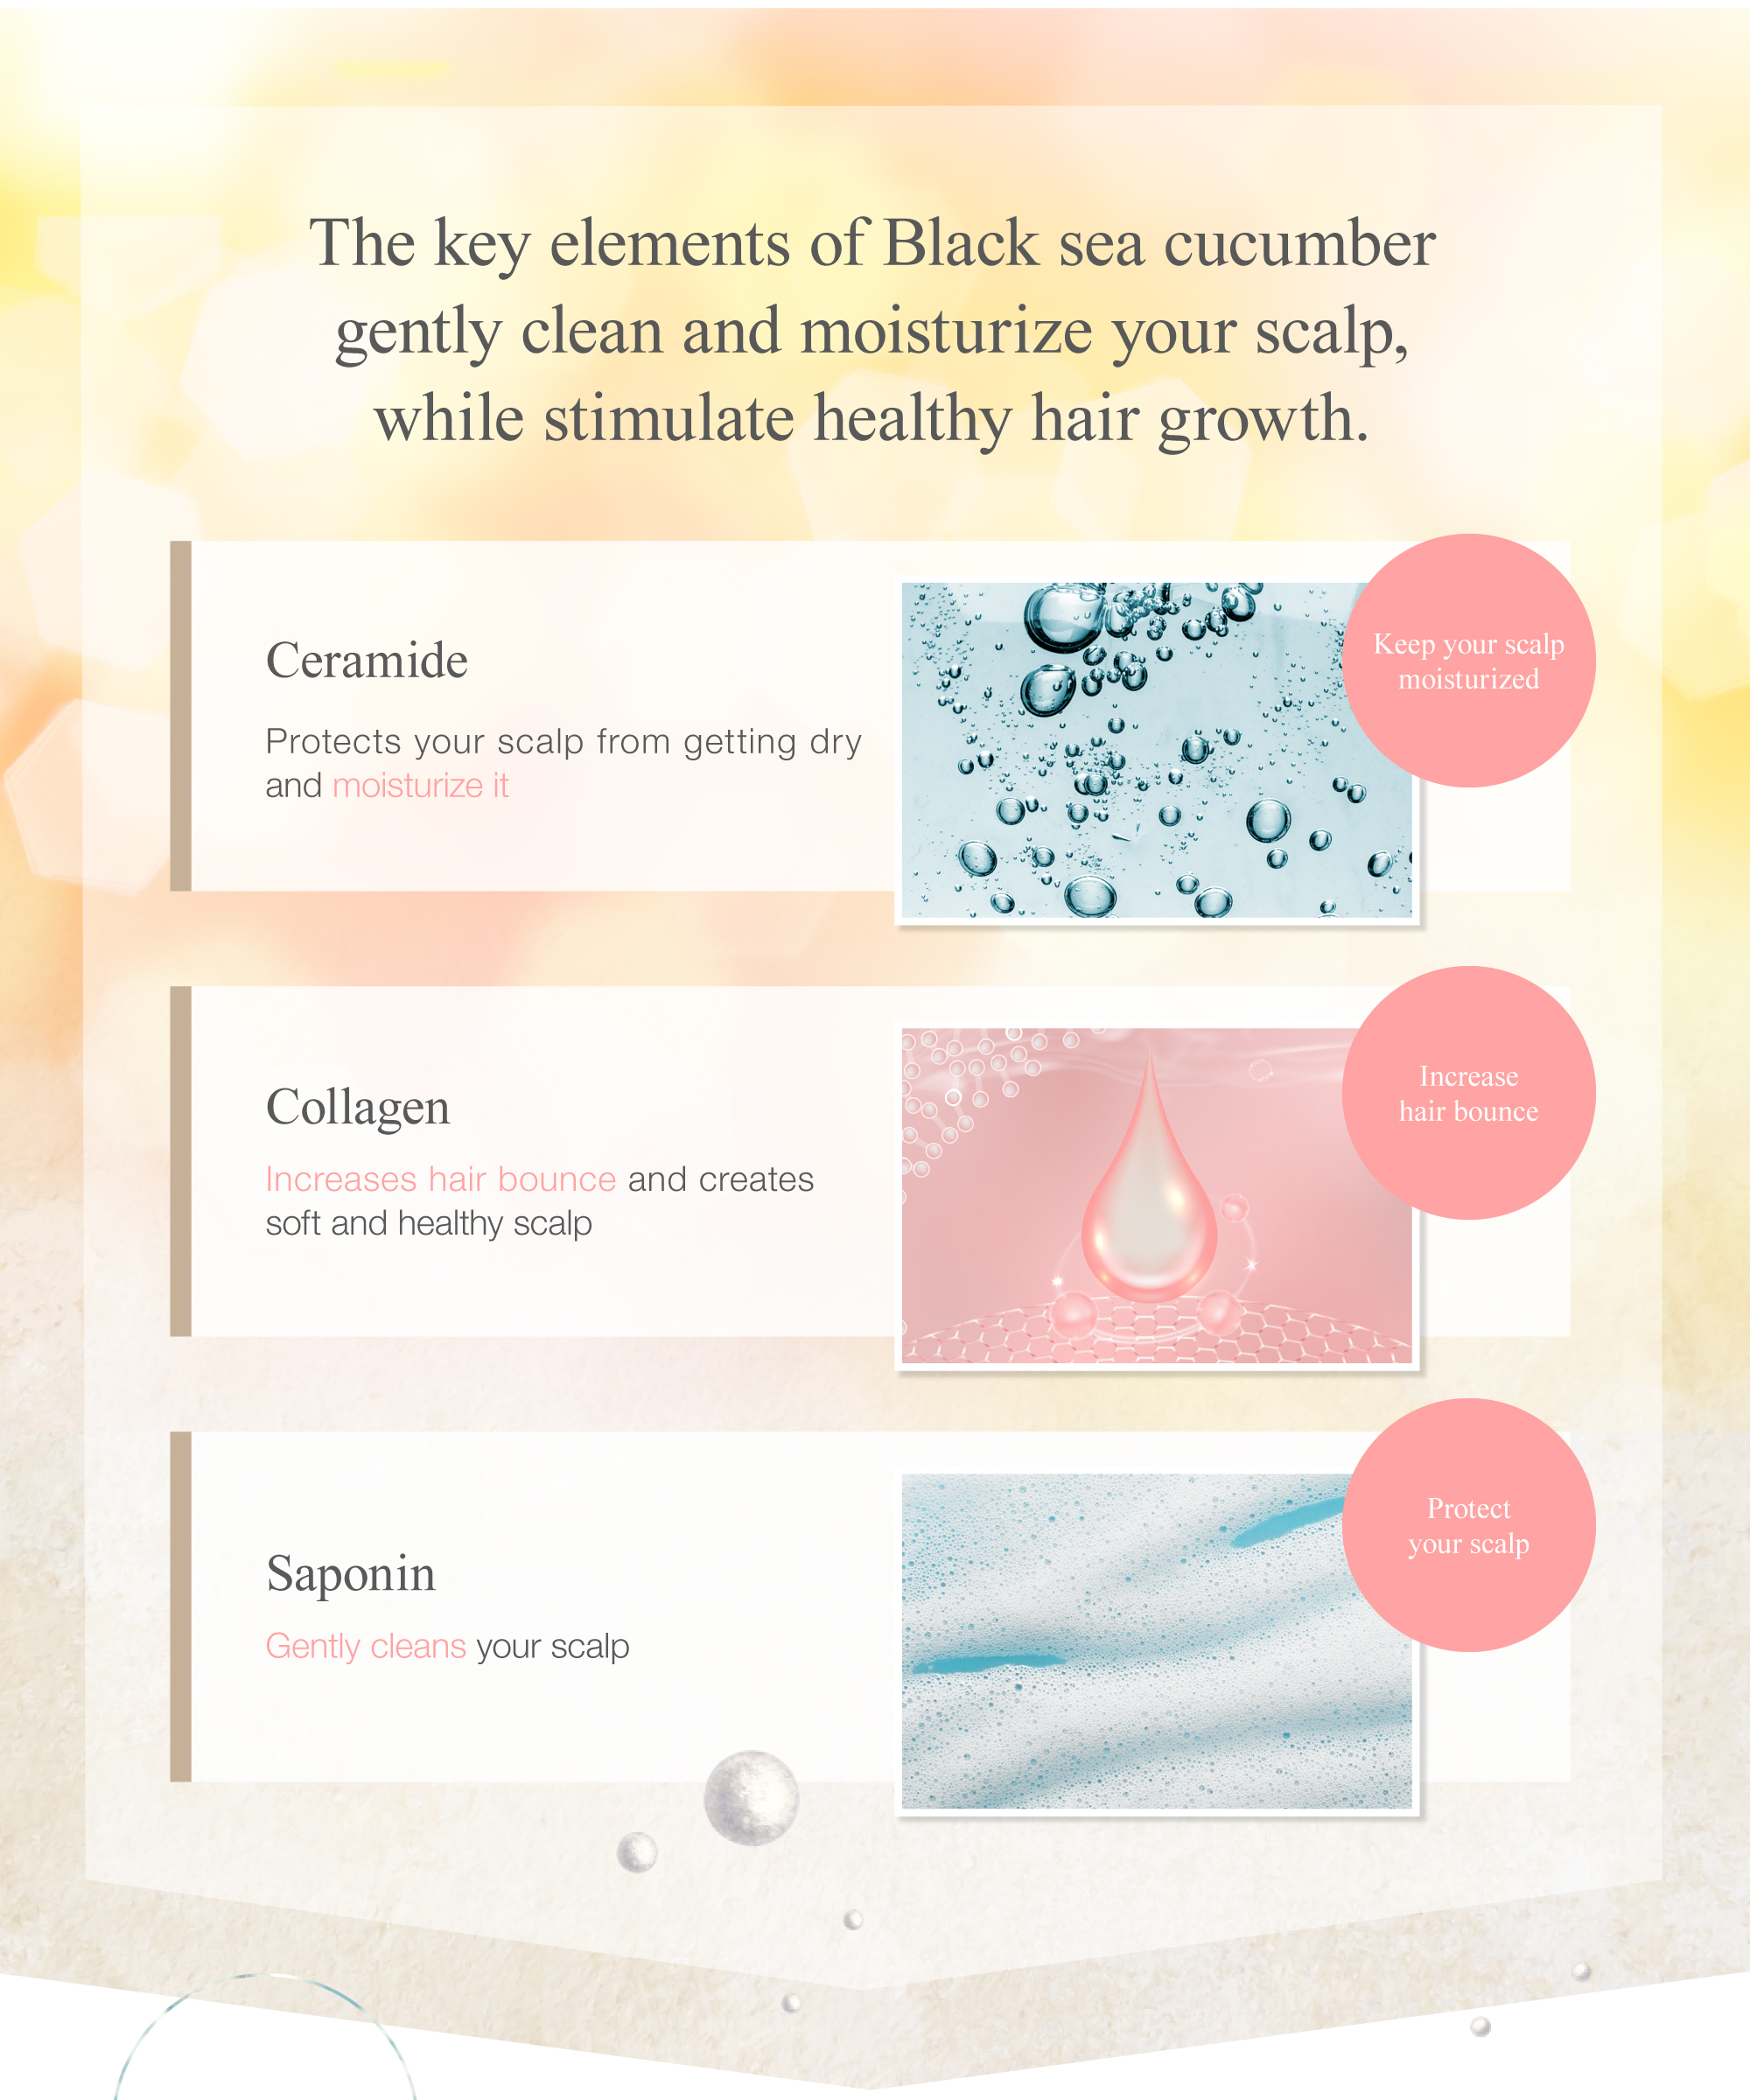 The key elements of Black sea cucumber gently shamp and moisturize your scalp, while stimulate healthy hair growth.